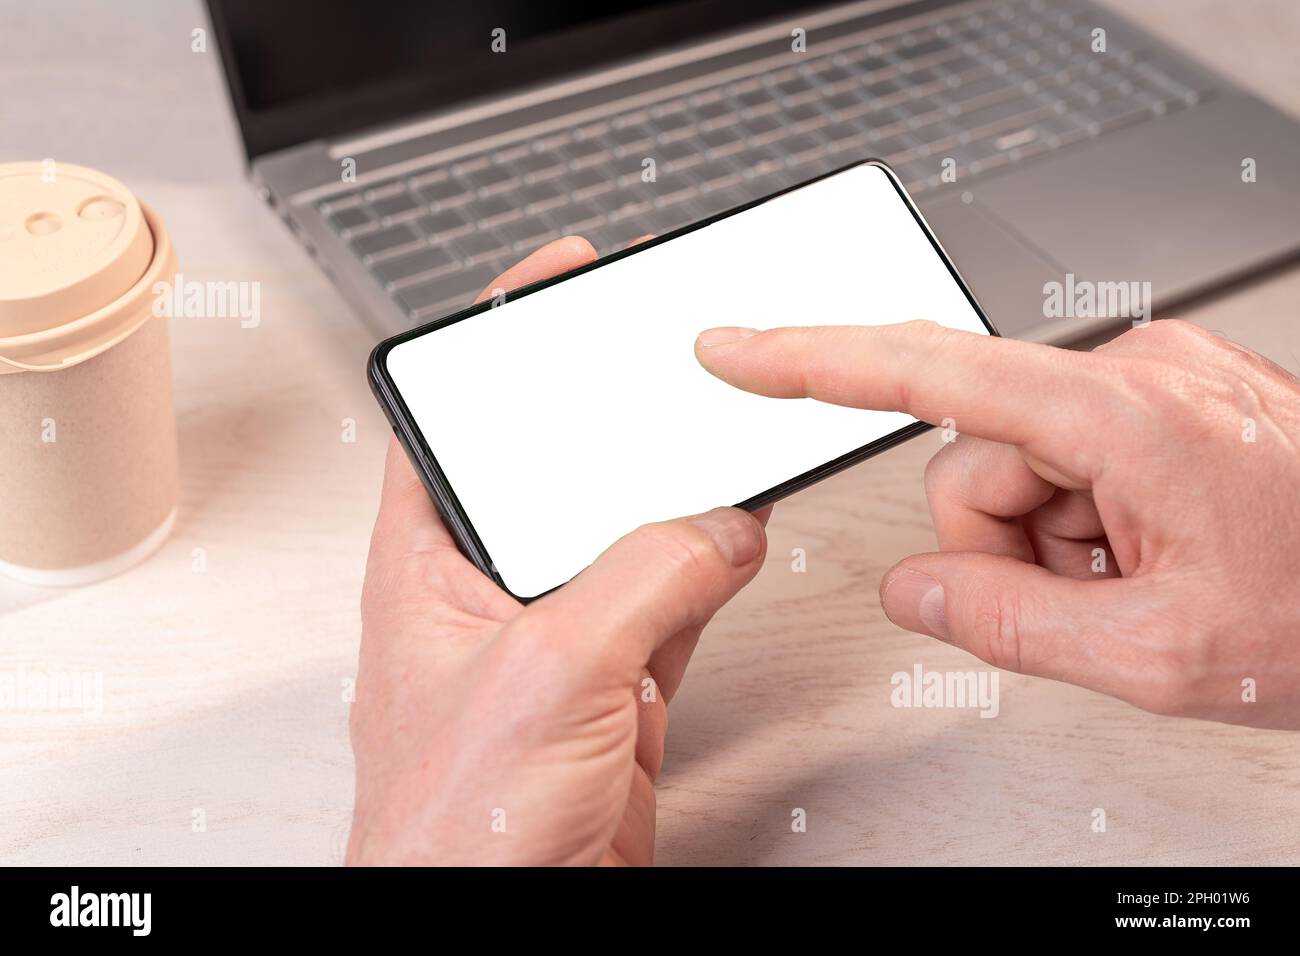 Finger pressing play, touching screen on mobile phone mockup, smartphone display mock-up for watching video. Stock Photo